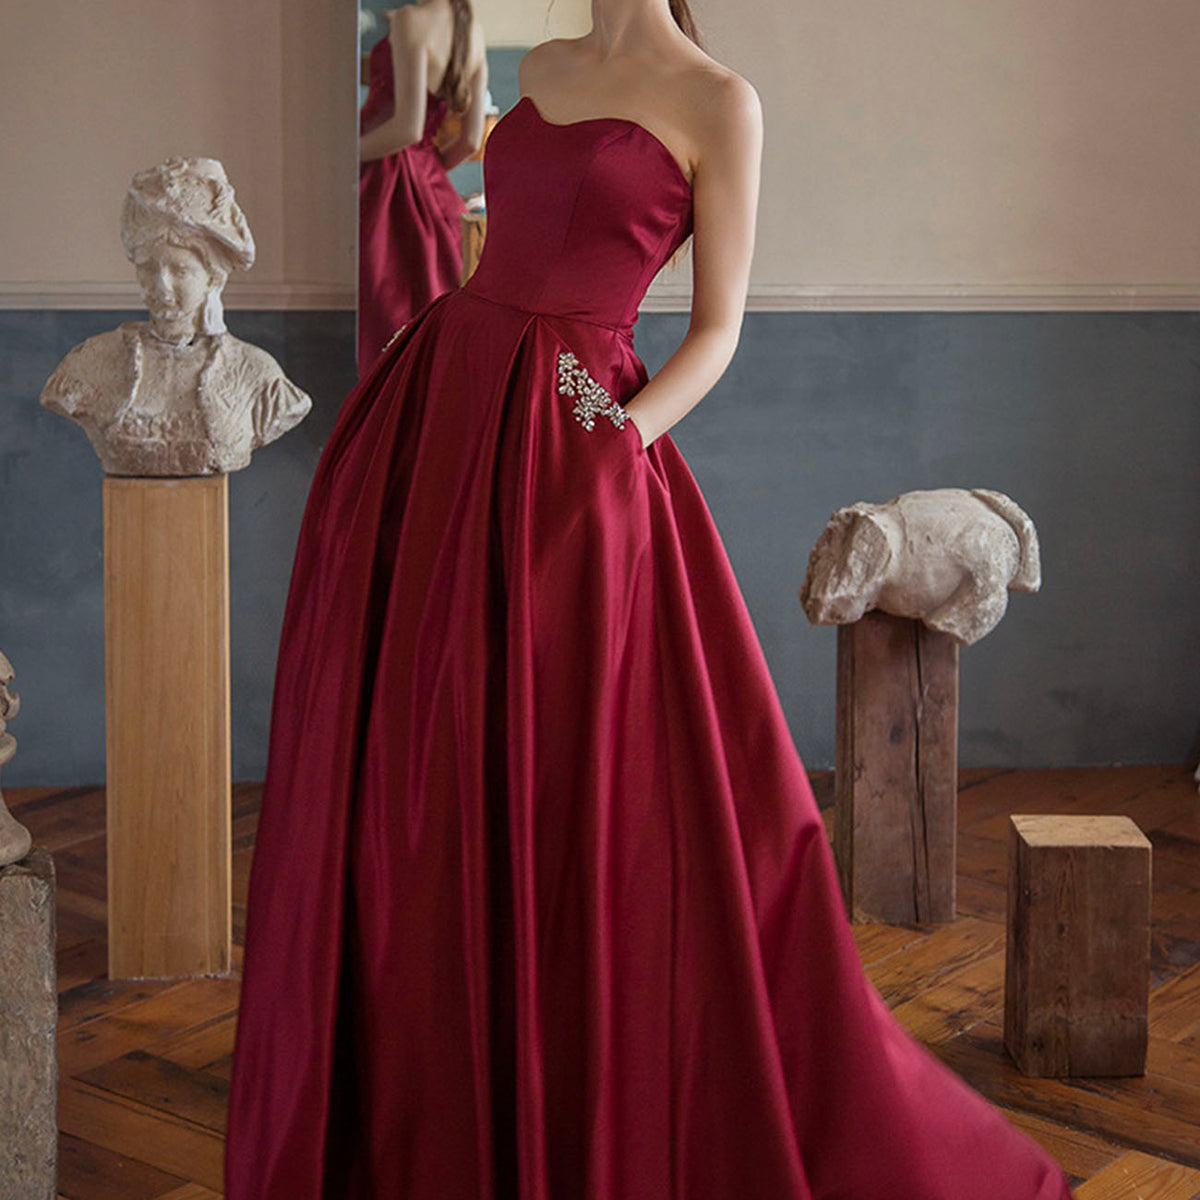 Strapless Red Satin Layered Long Prom Dress with Belt, Long Red Formal  Graduation Evening Dress A1413